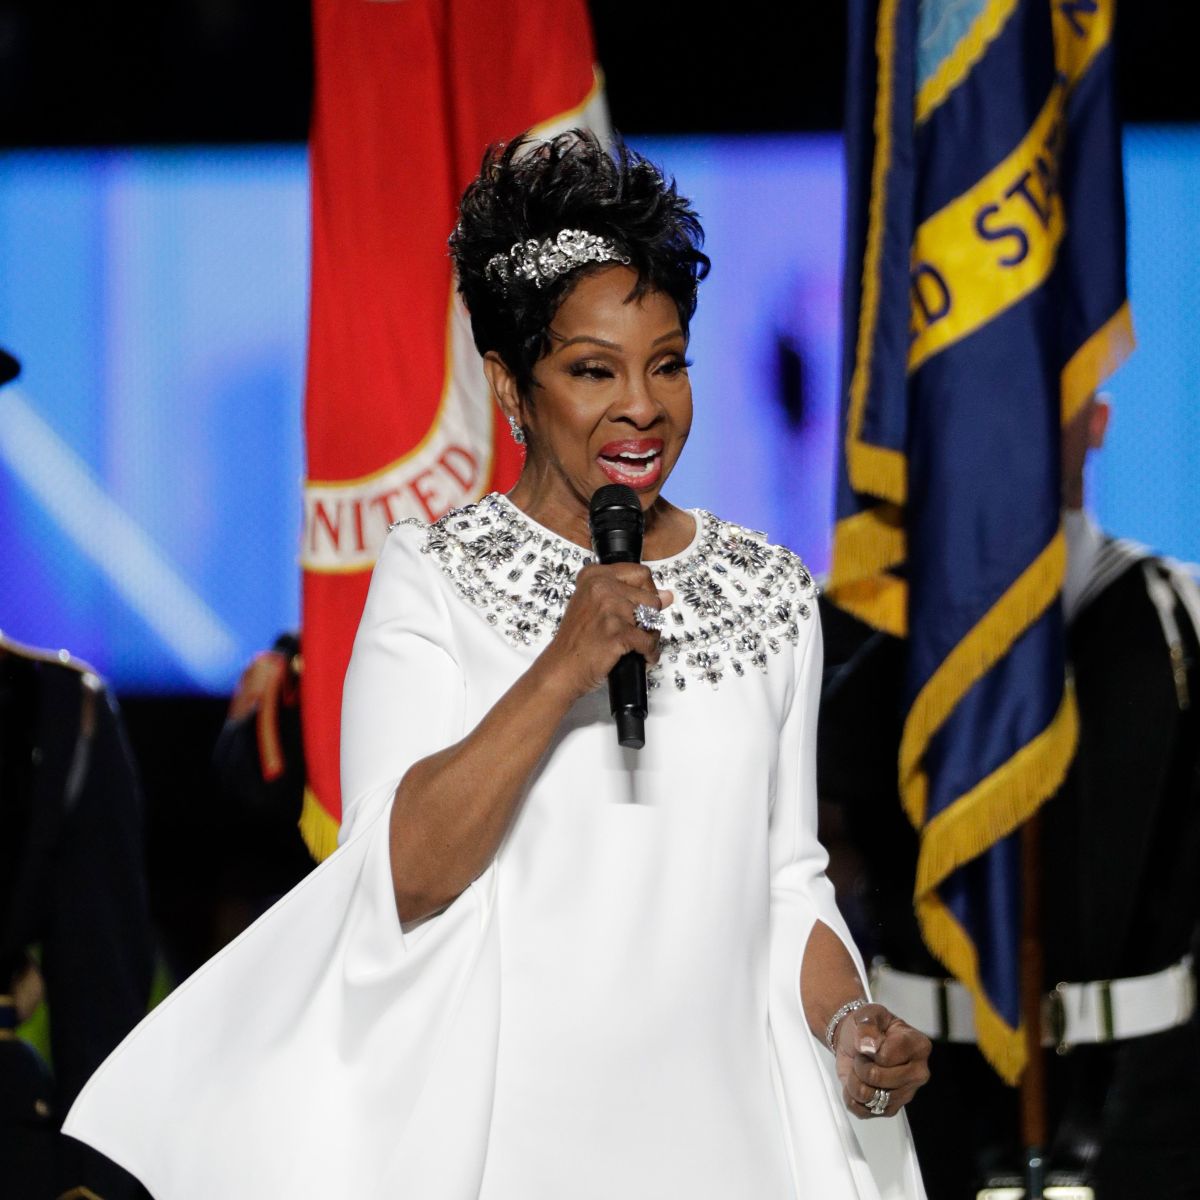 Gladys Knight News, Articles, Stories & Trends for Today